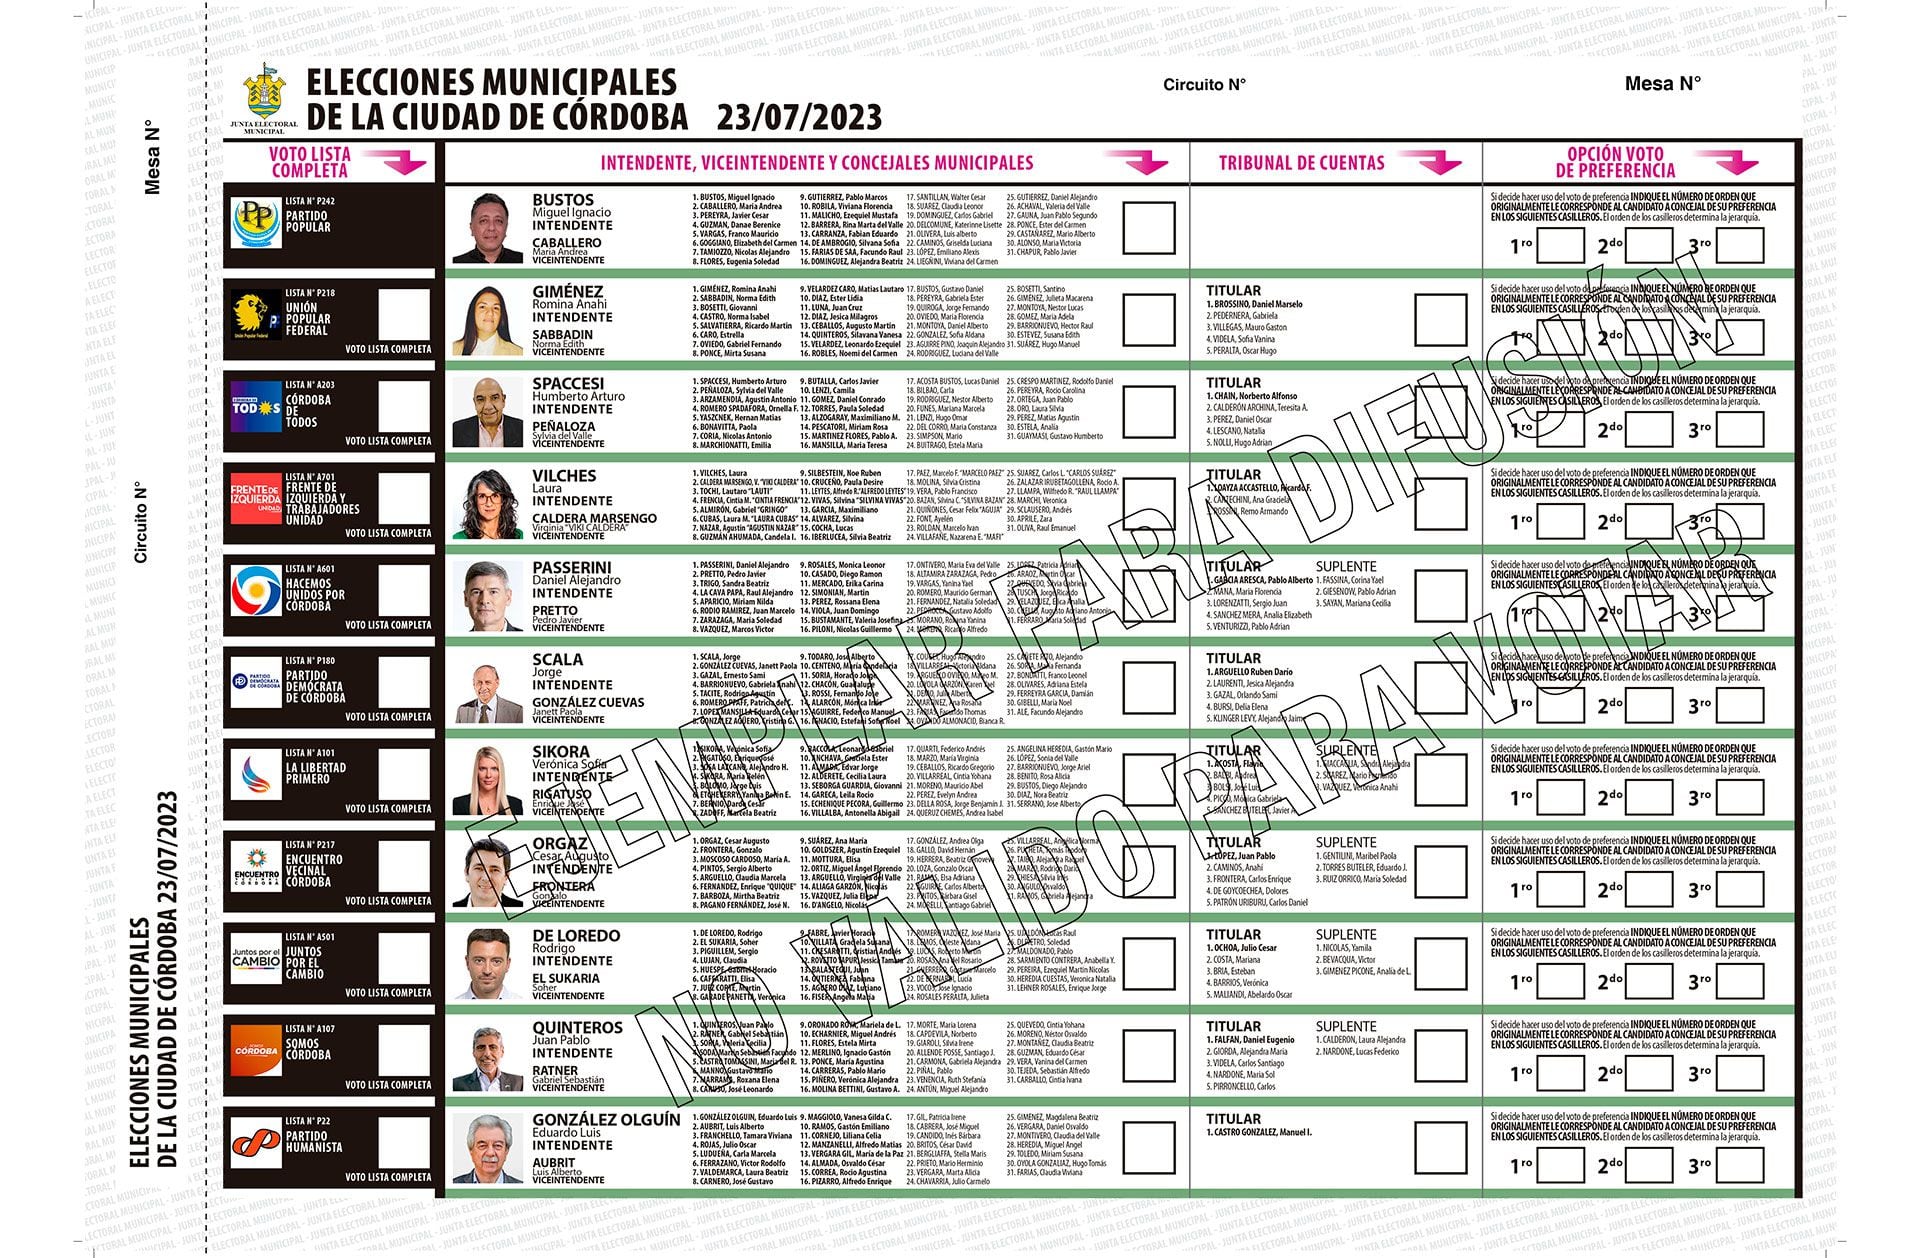 This is the ballot for the Córdoba 2023 municipal elections